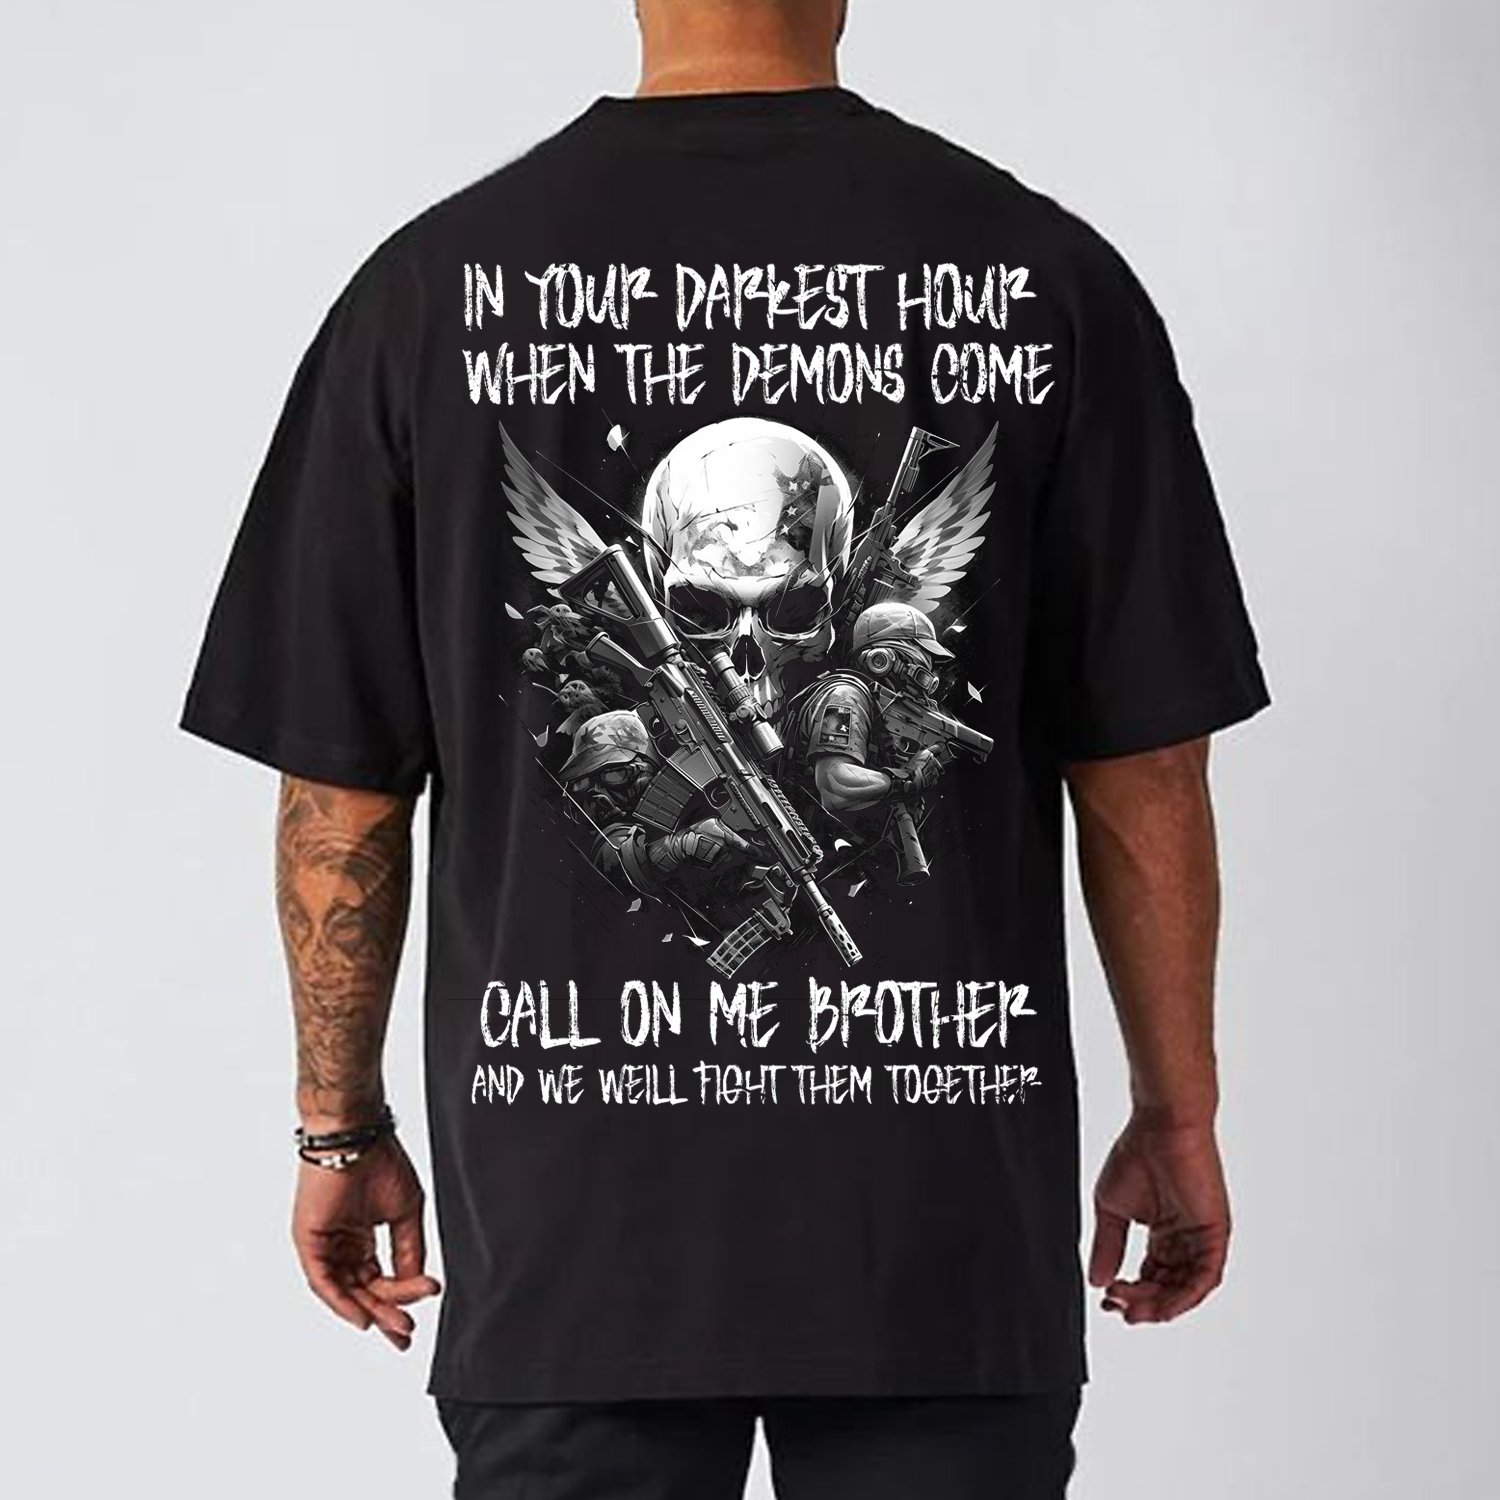 In Your Darkest Hour When The Demons Come Men's Short Sleeve T-shirt